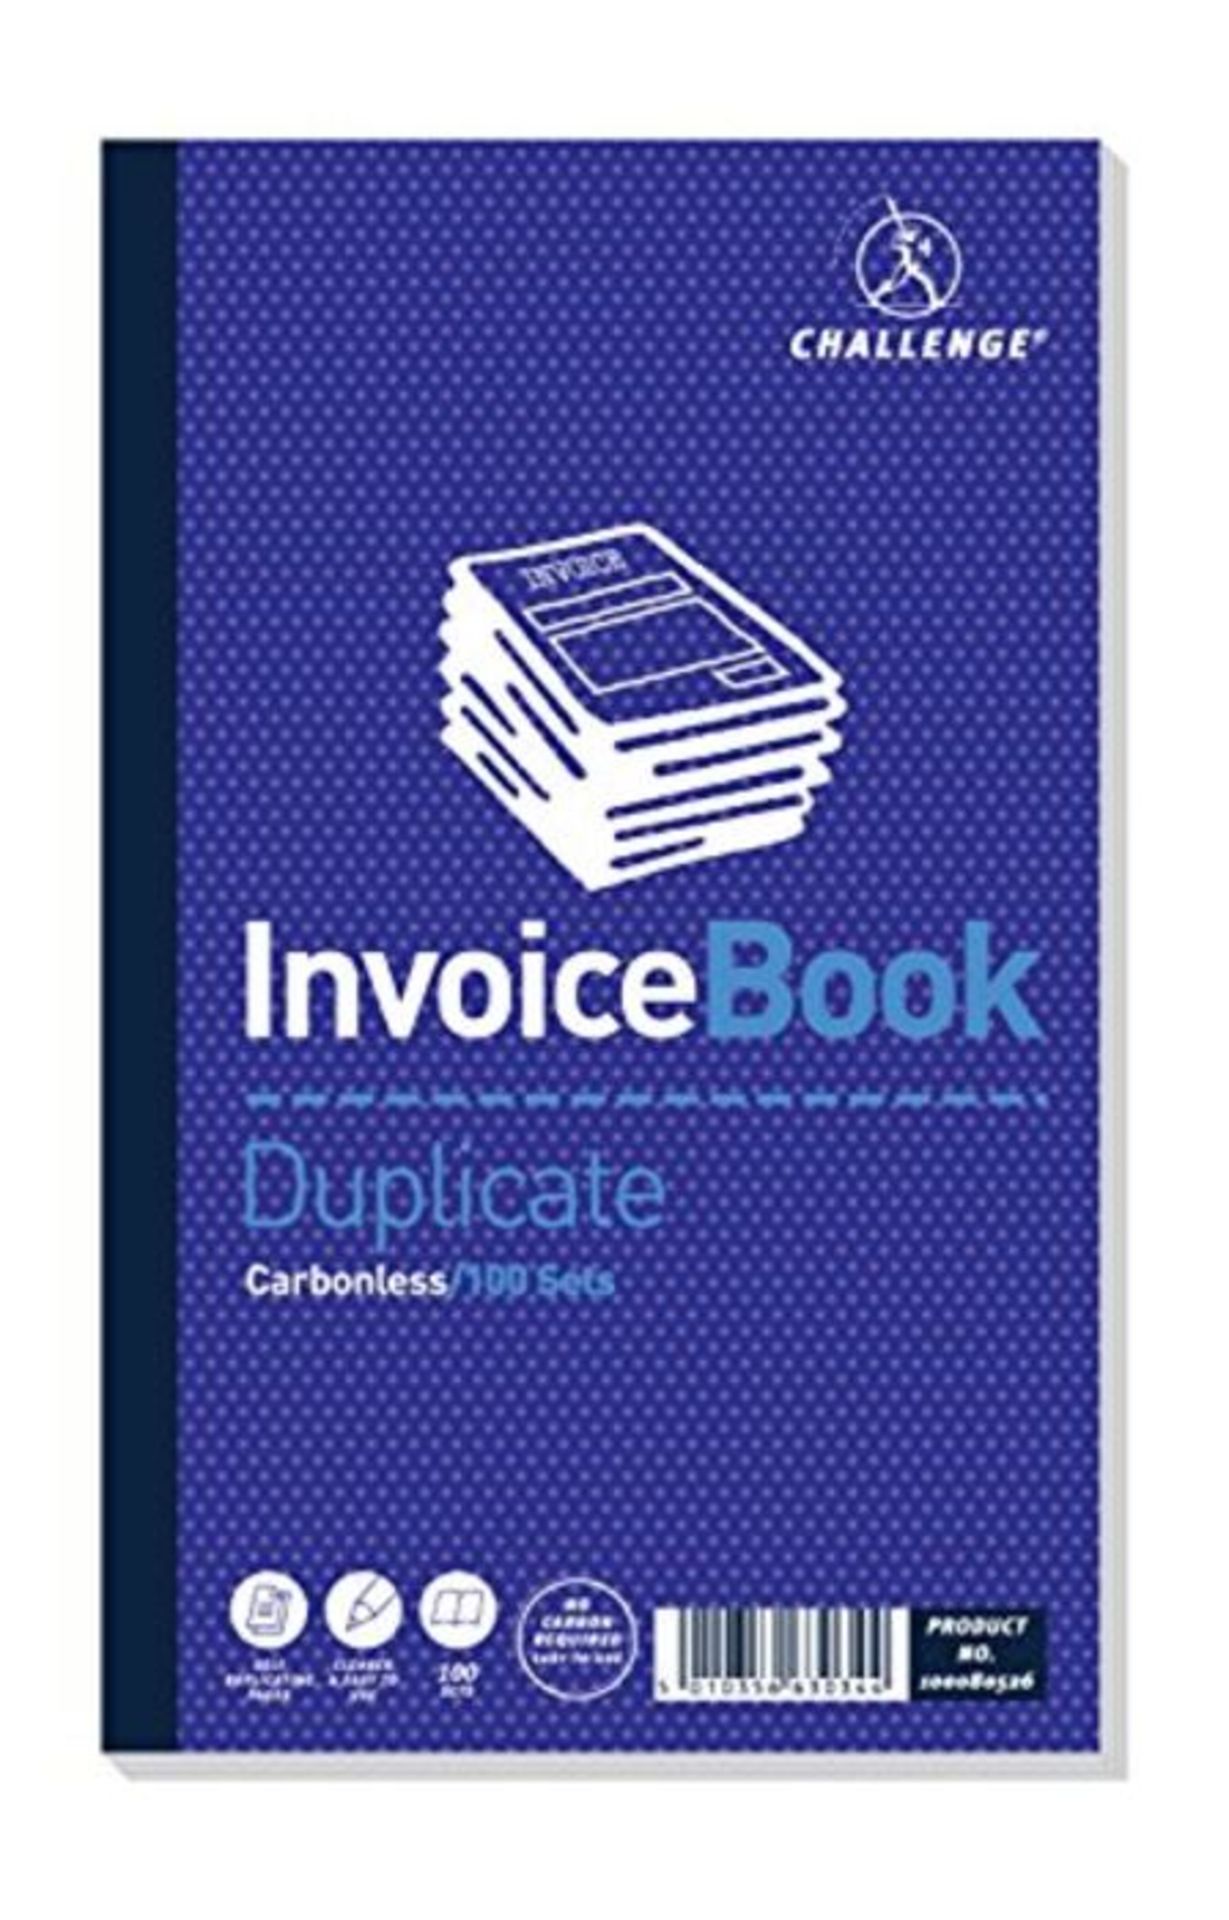 Challenge 210 x 130 mm Duplicate Book Carbonless Invoice without Vat/Tax, 100 Pages, S